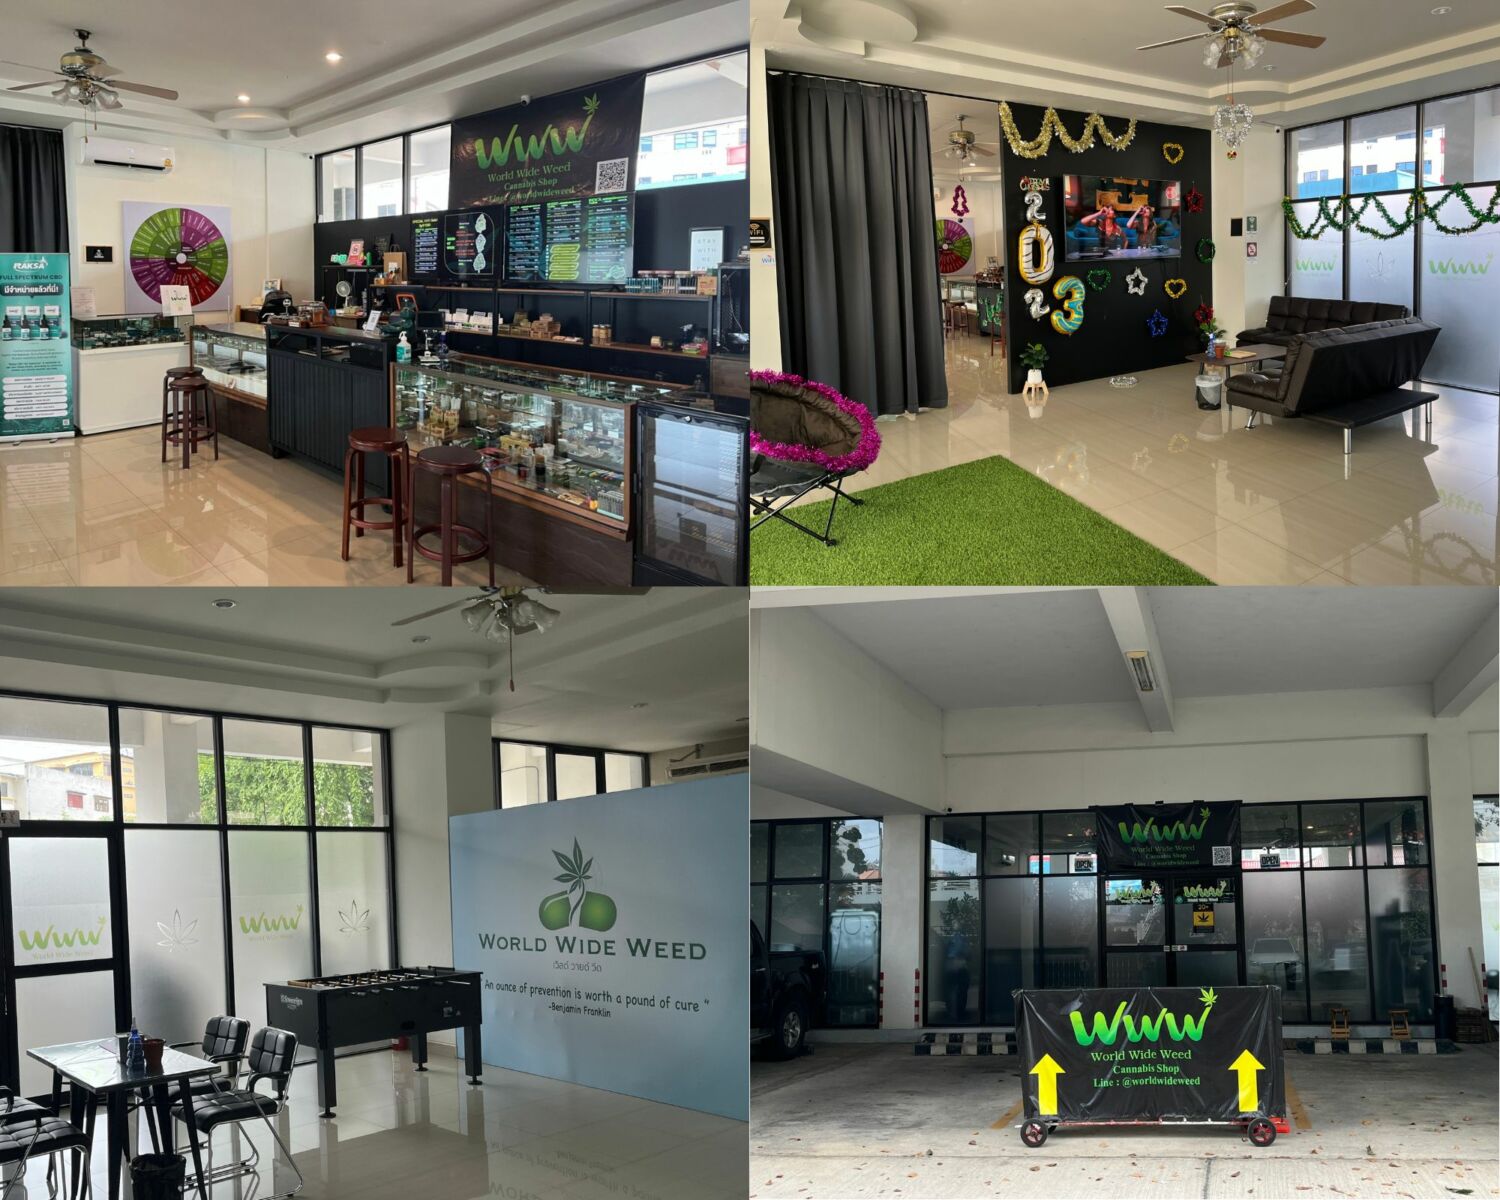 Where you can get cannabis in Pattaya | News by Thaiger